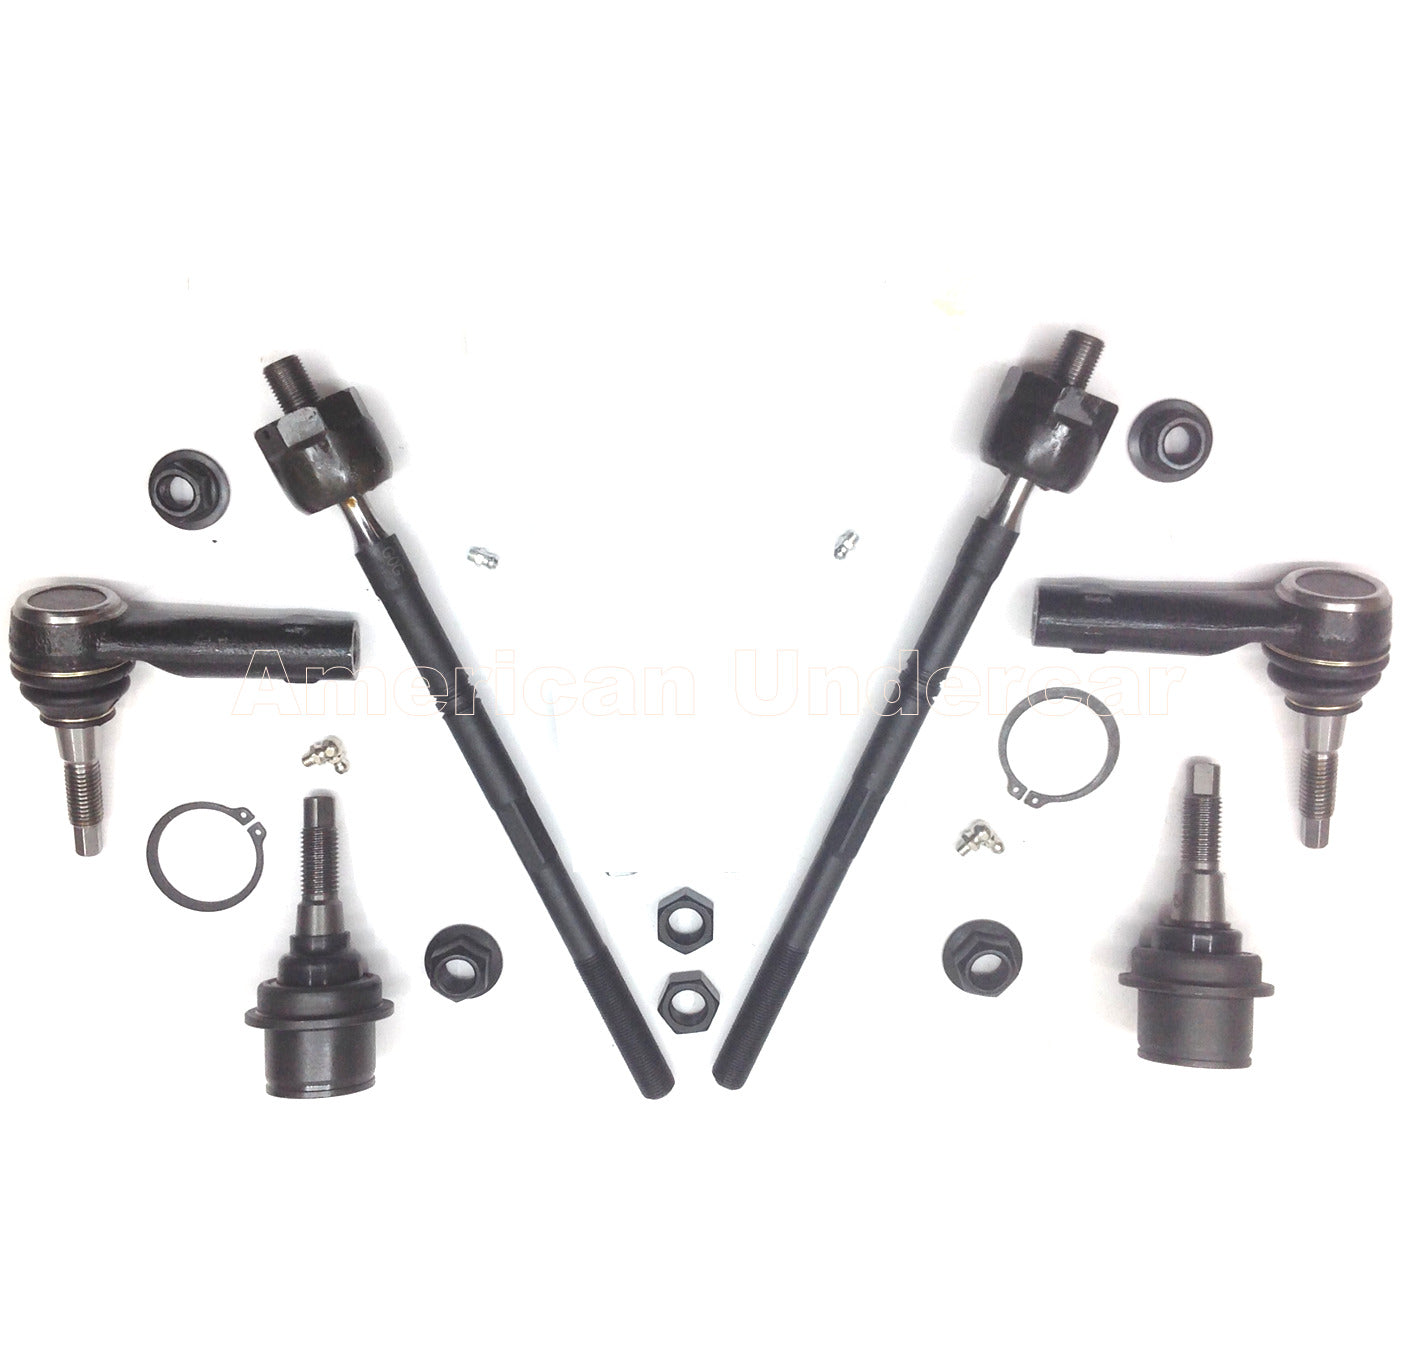 HD Lower Ball Joints Tie Rod Steering Kit for 2003-2006 Ford Expedition RWD